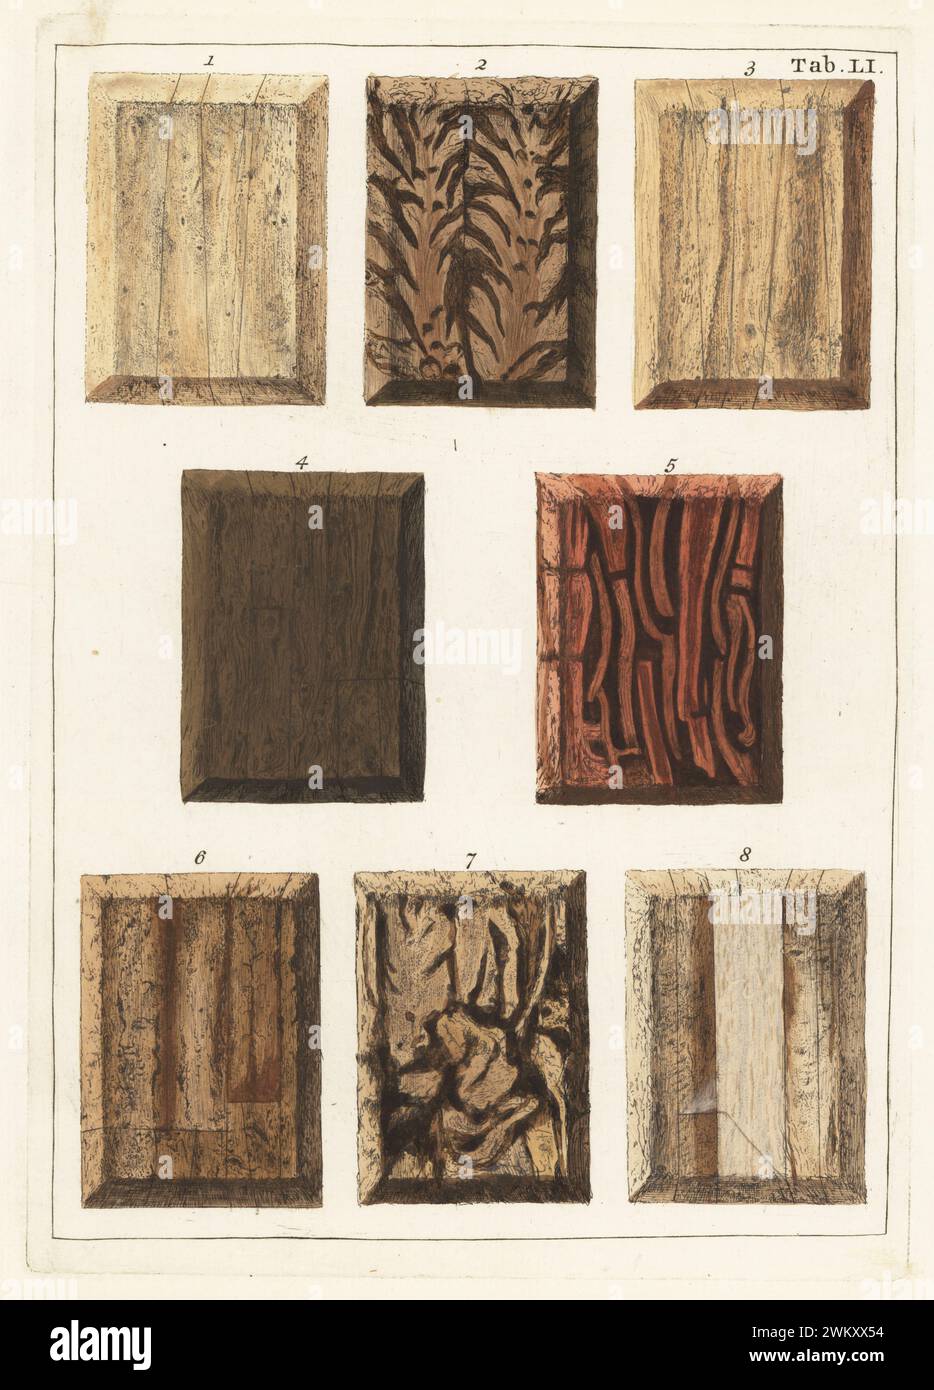 Marsh-mallow root 1, male fern root 2, succory root 3, jalap root 4, madder root 5, patience root 6, female fern root 7 and mandrake root 8. Handcoloured copperplate engraving by Jan Christian Sepp from Martinus Houttuyn’s Icones Lignorum exoticorum et nostratium: Wood Science, Representations of Native and Exotic Woods, J.C. Sepp, Amsterdam, Holland, 1773. Stock Photo